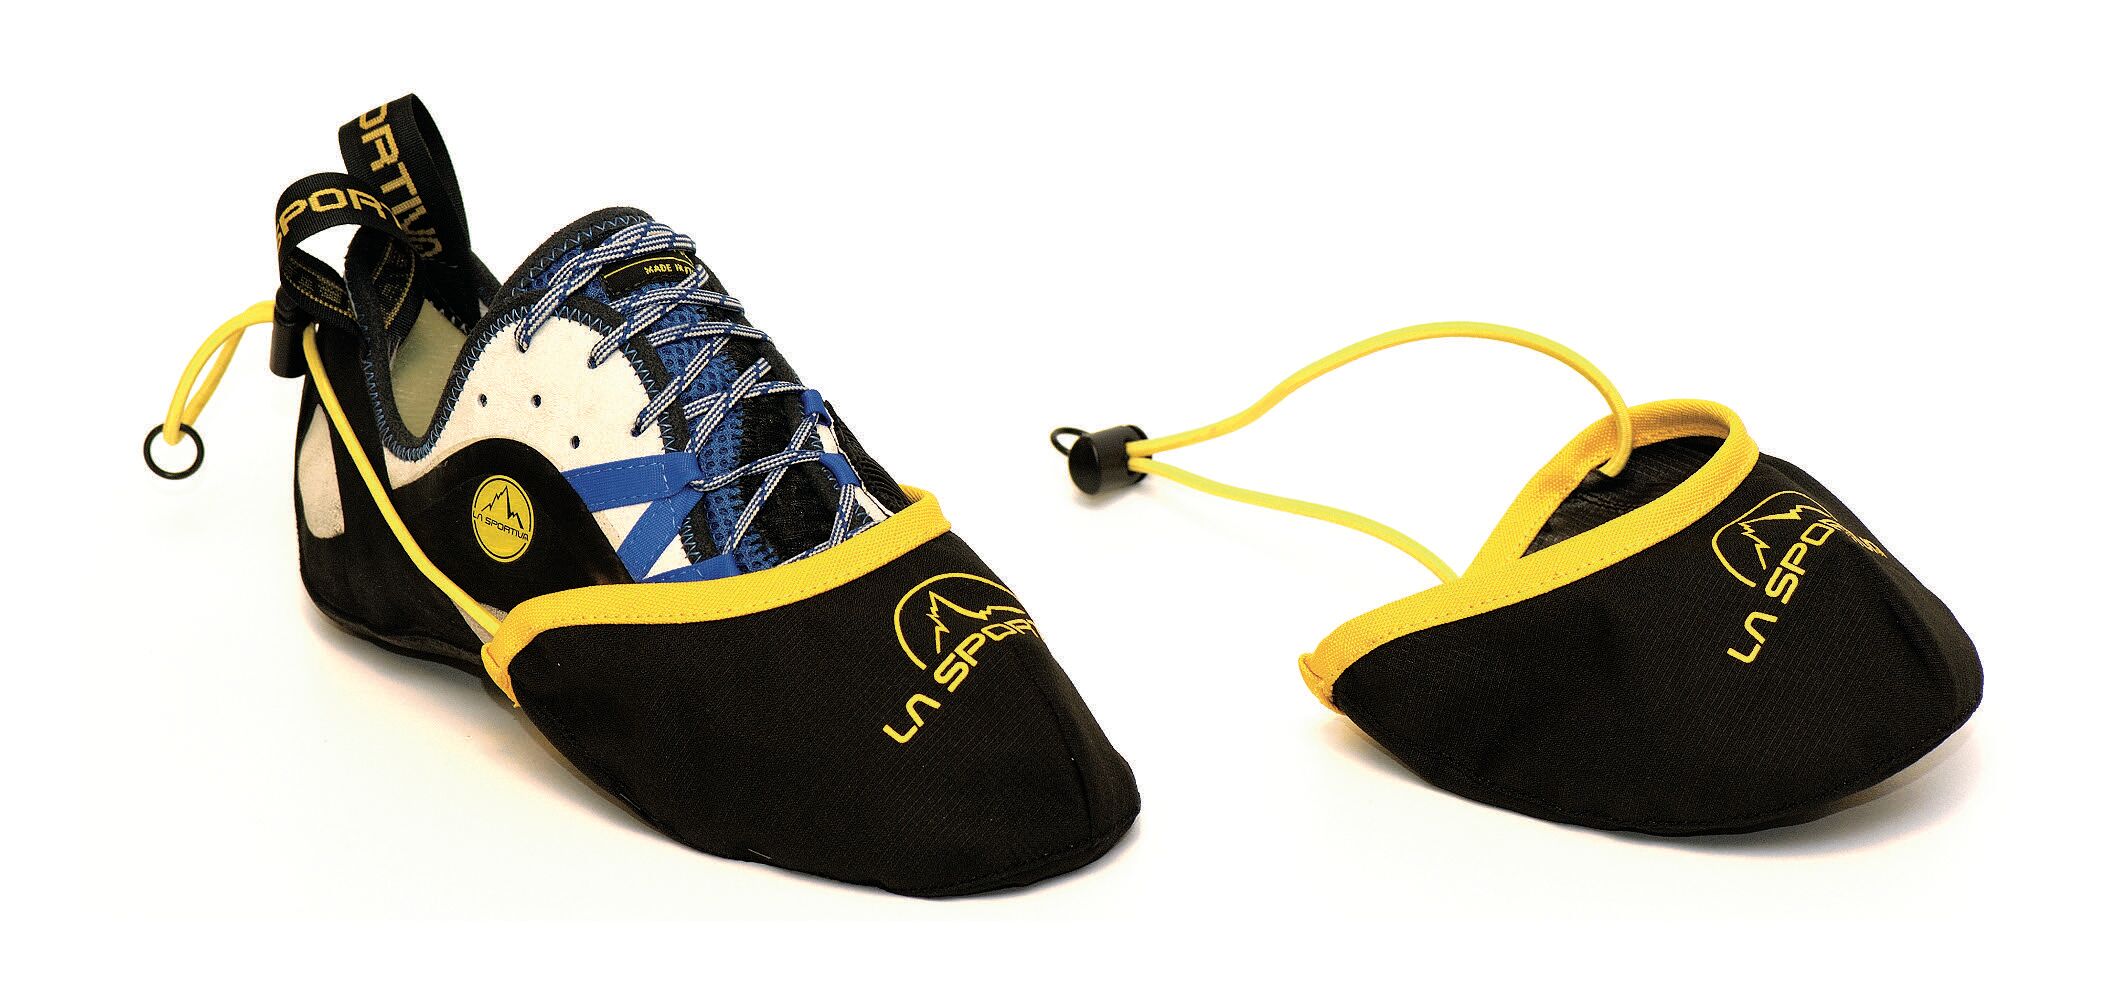 La Sportiva Shoe Cover - Protection pour chaussons d'escalade | Hardloop